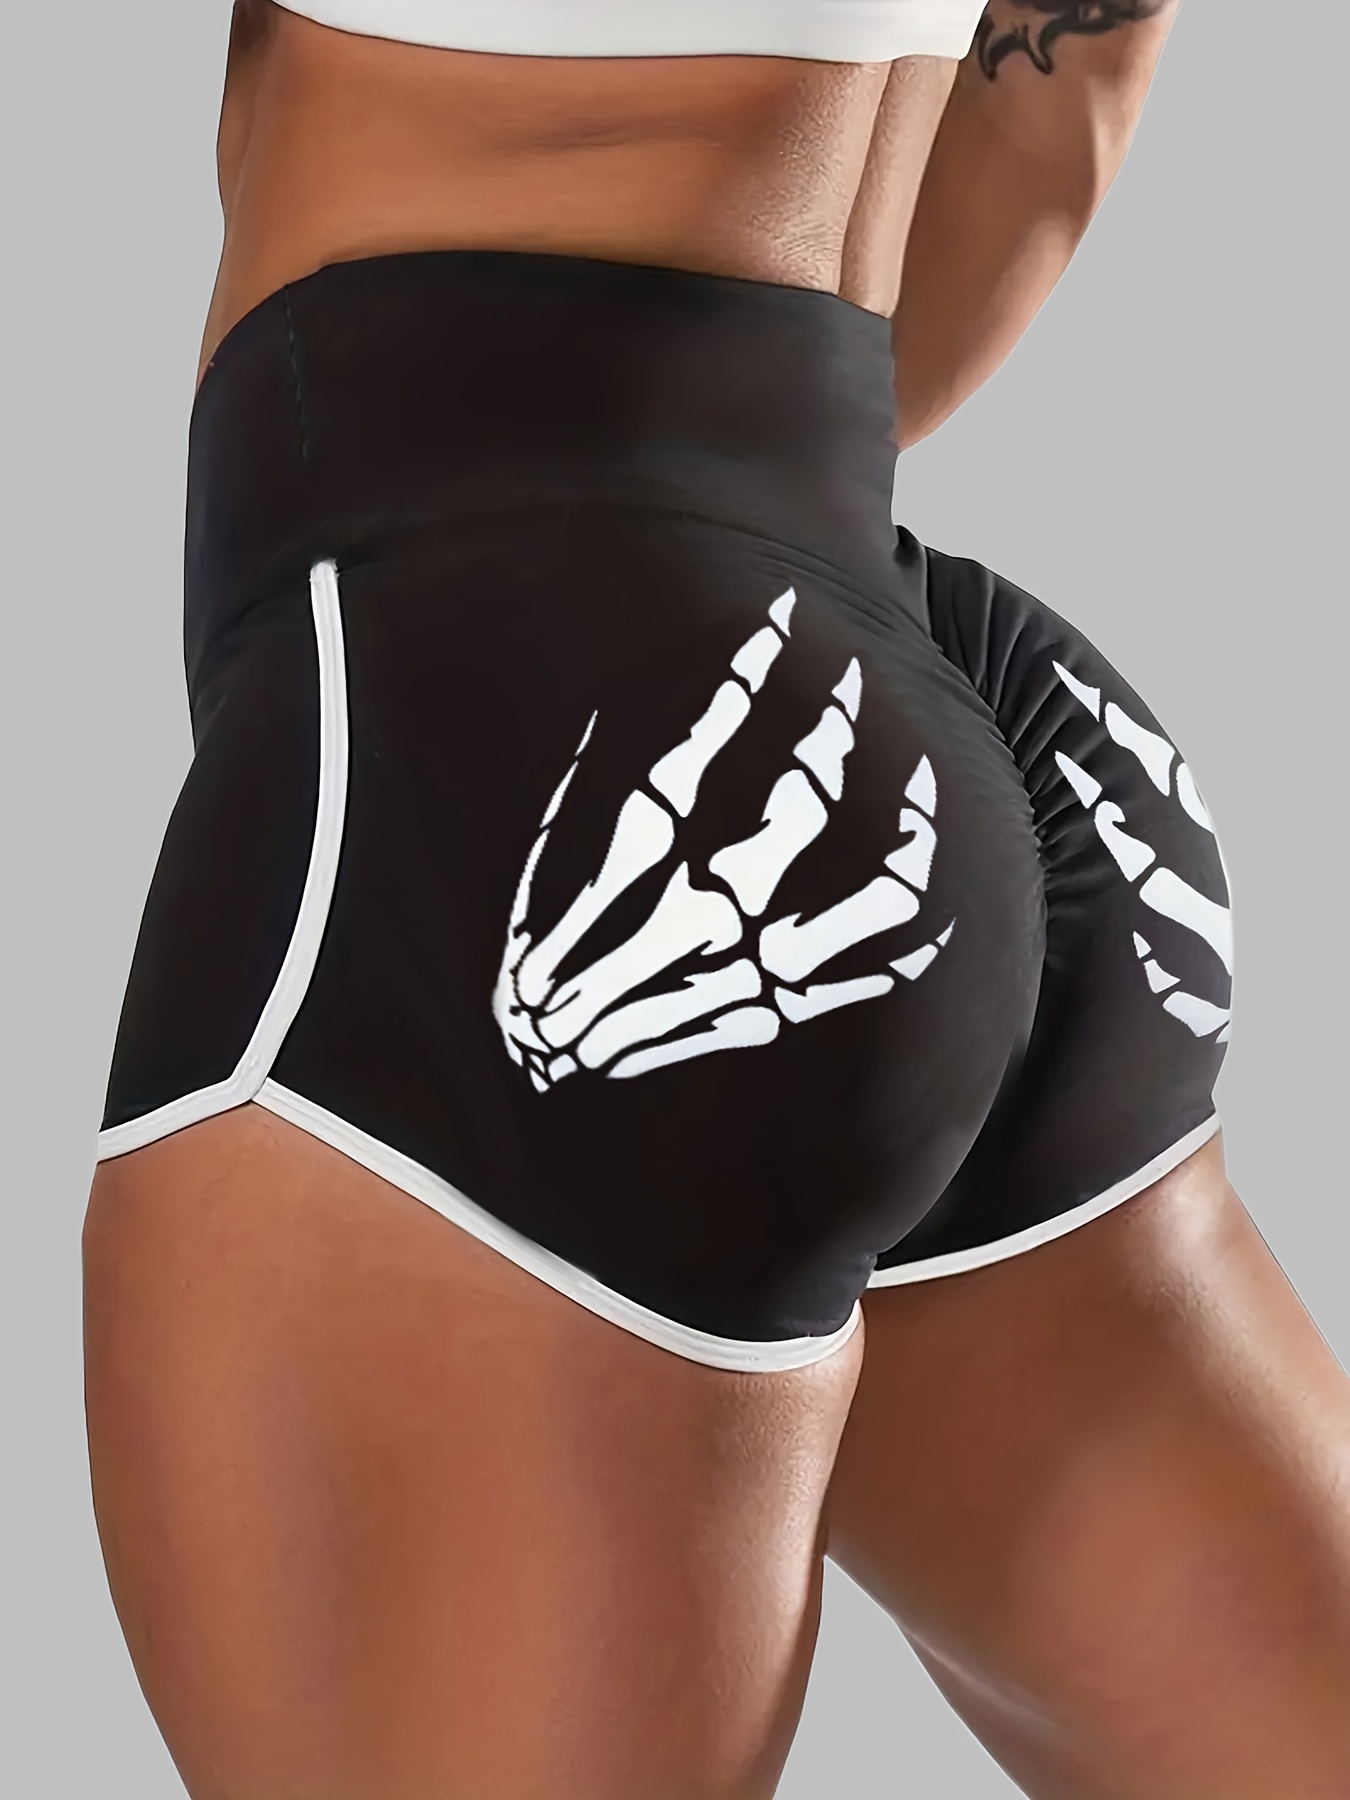 Women's Letter Print Ruched Butt Booty Shorts Workout Yoga Sports